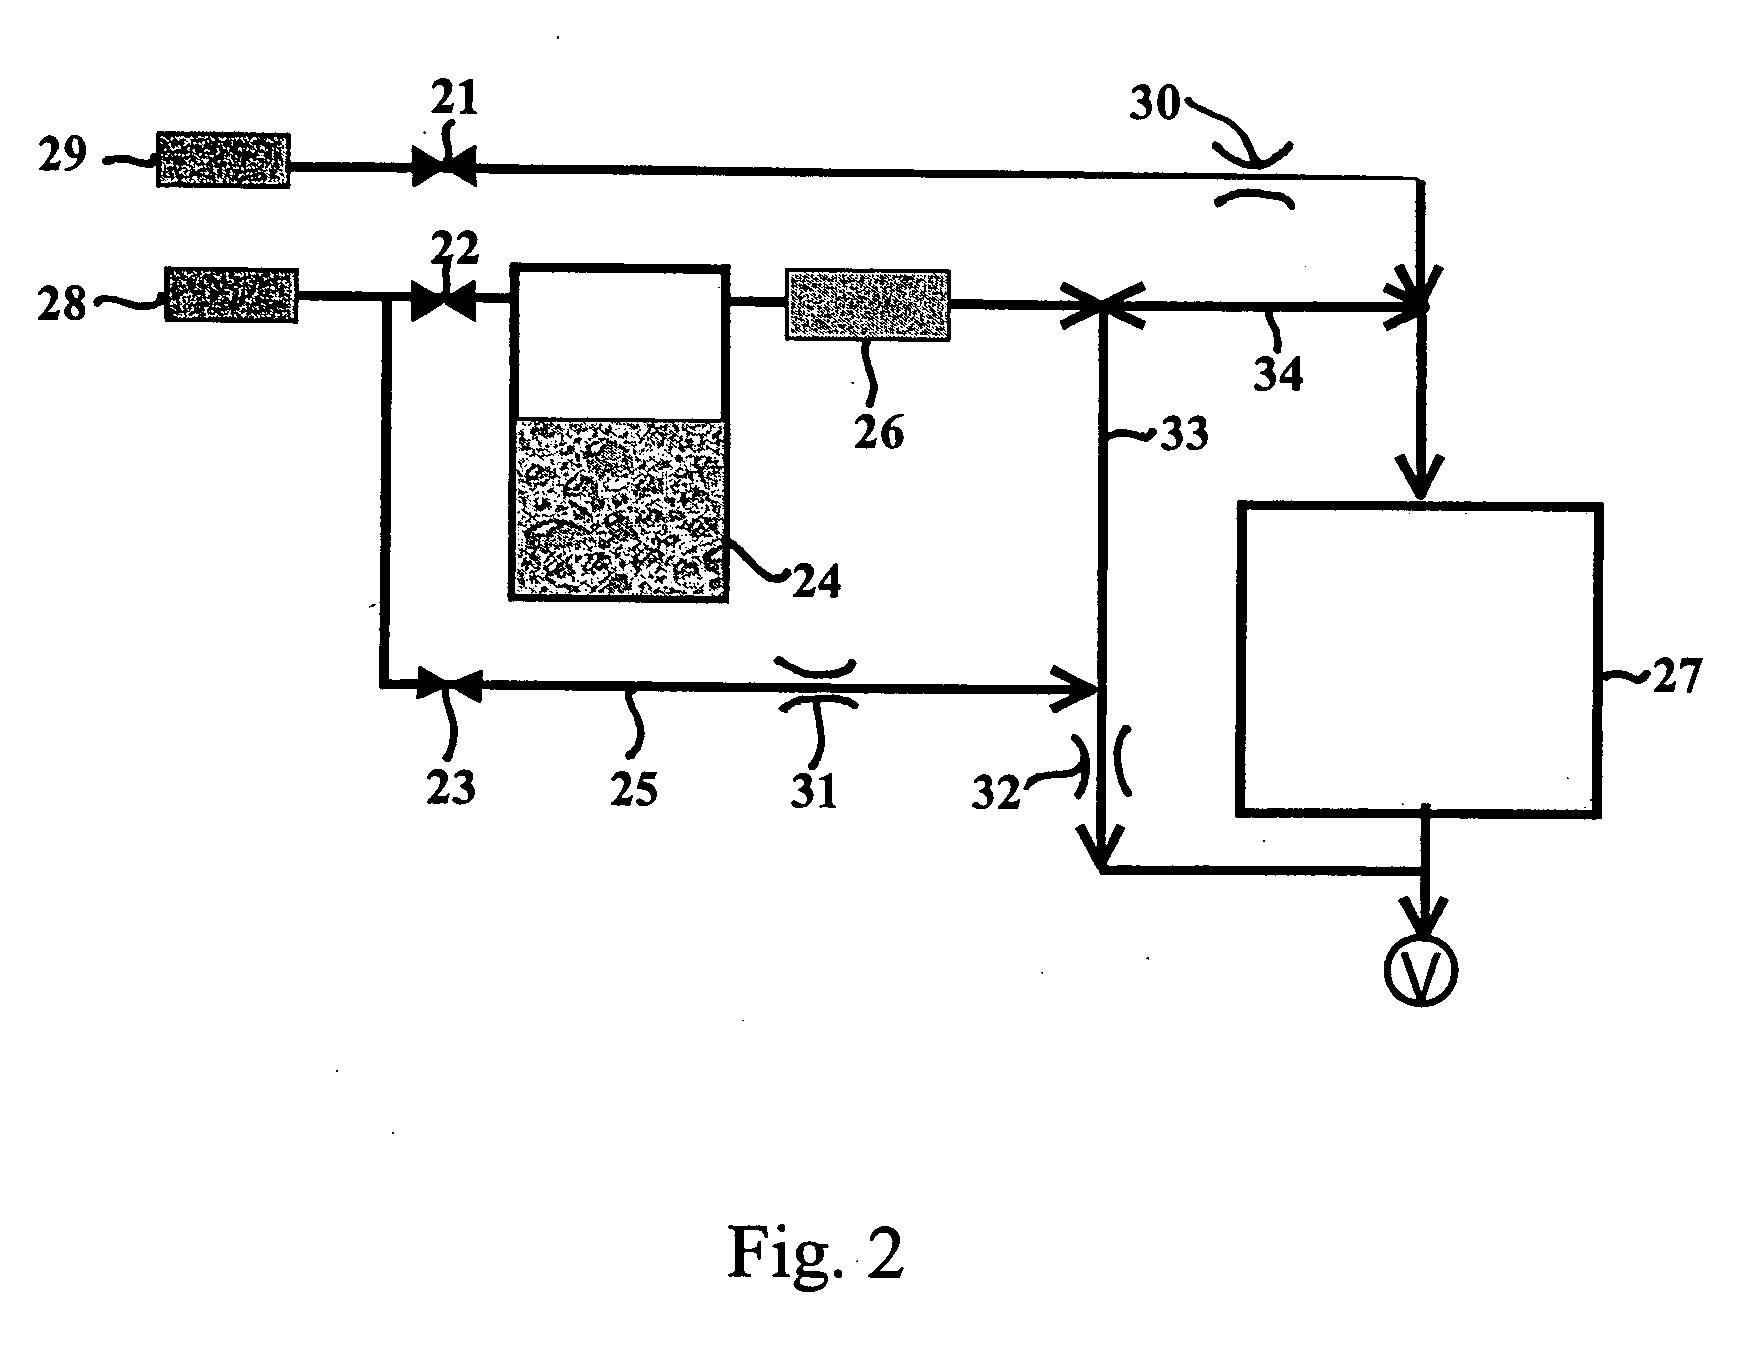 Method of growing a thin film onto a substrate